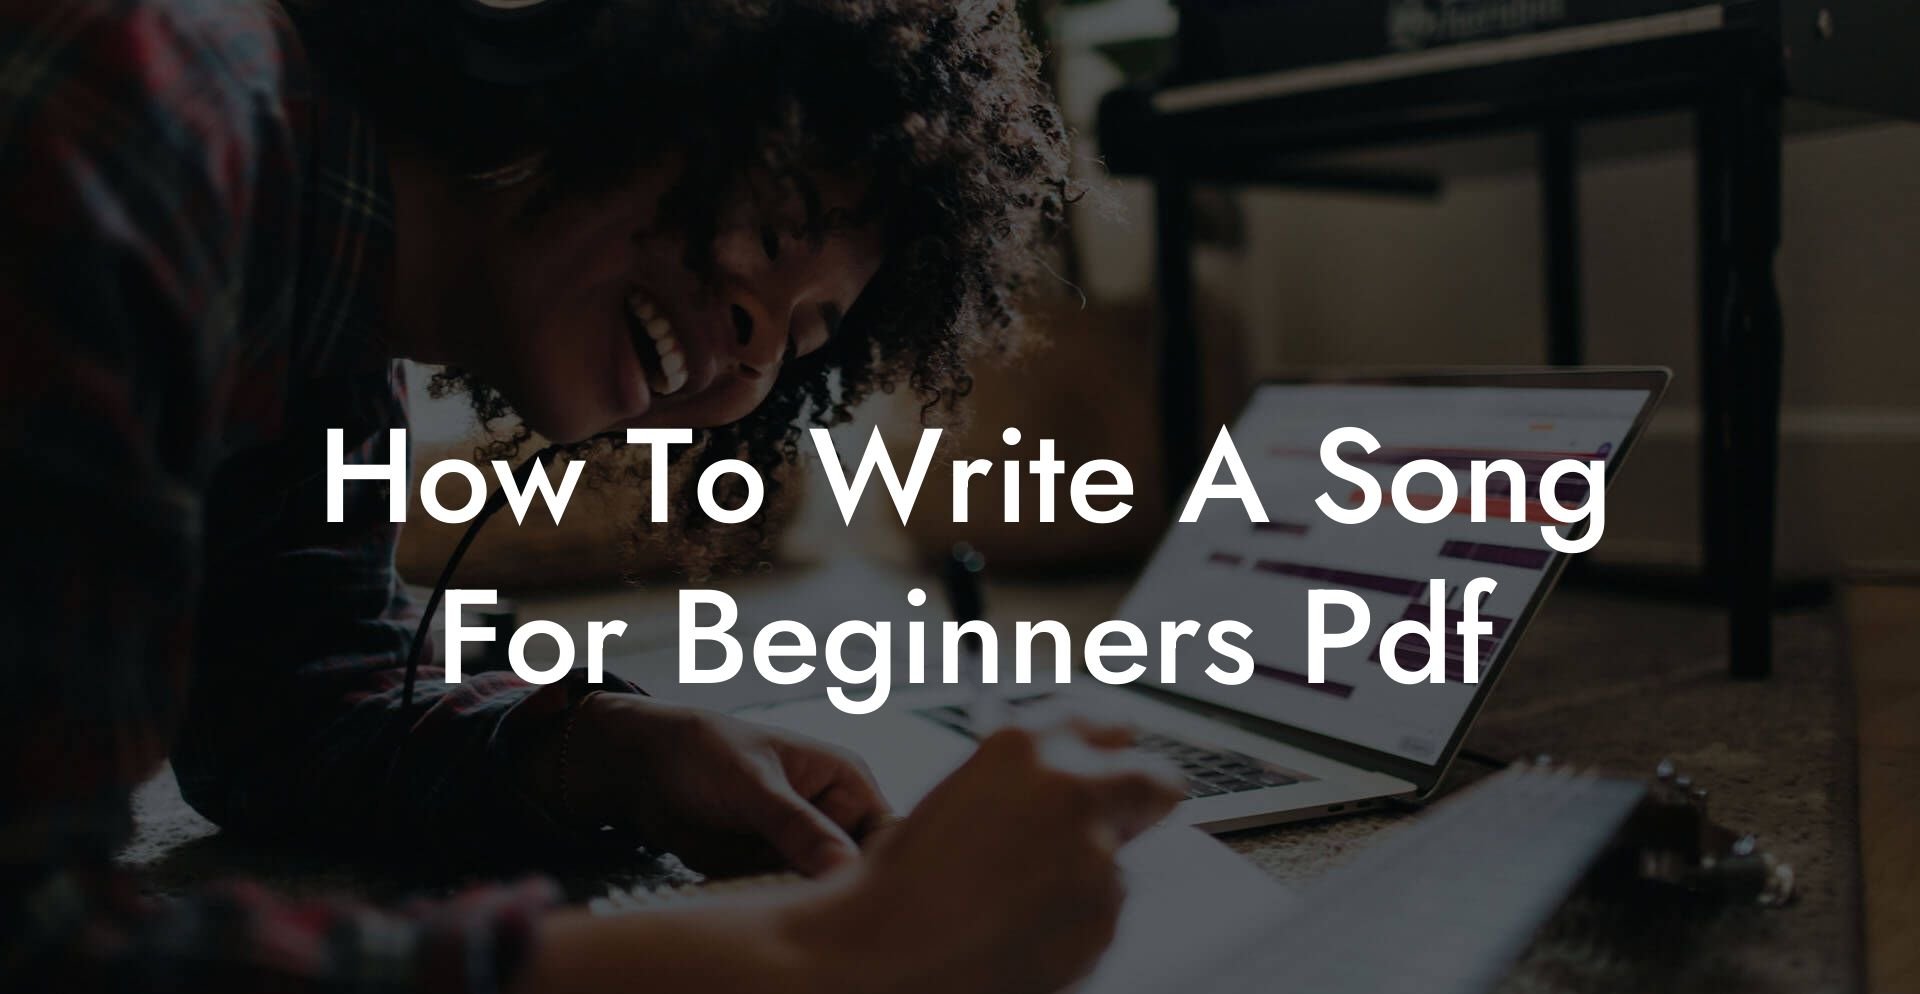 how to write a song for beginners pdf lyric assistant